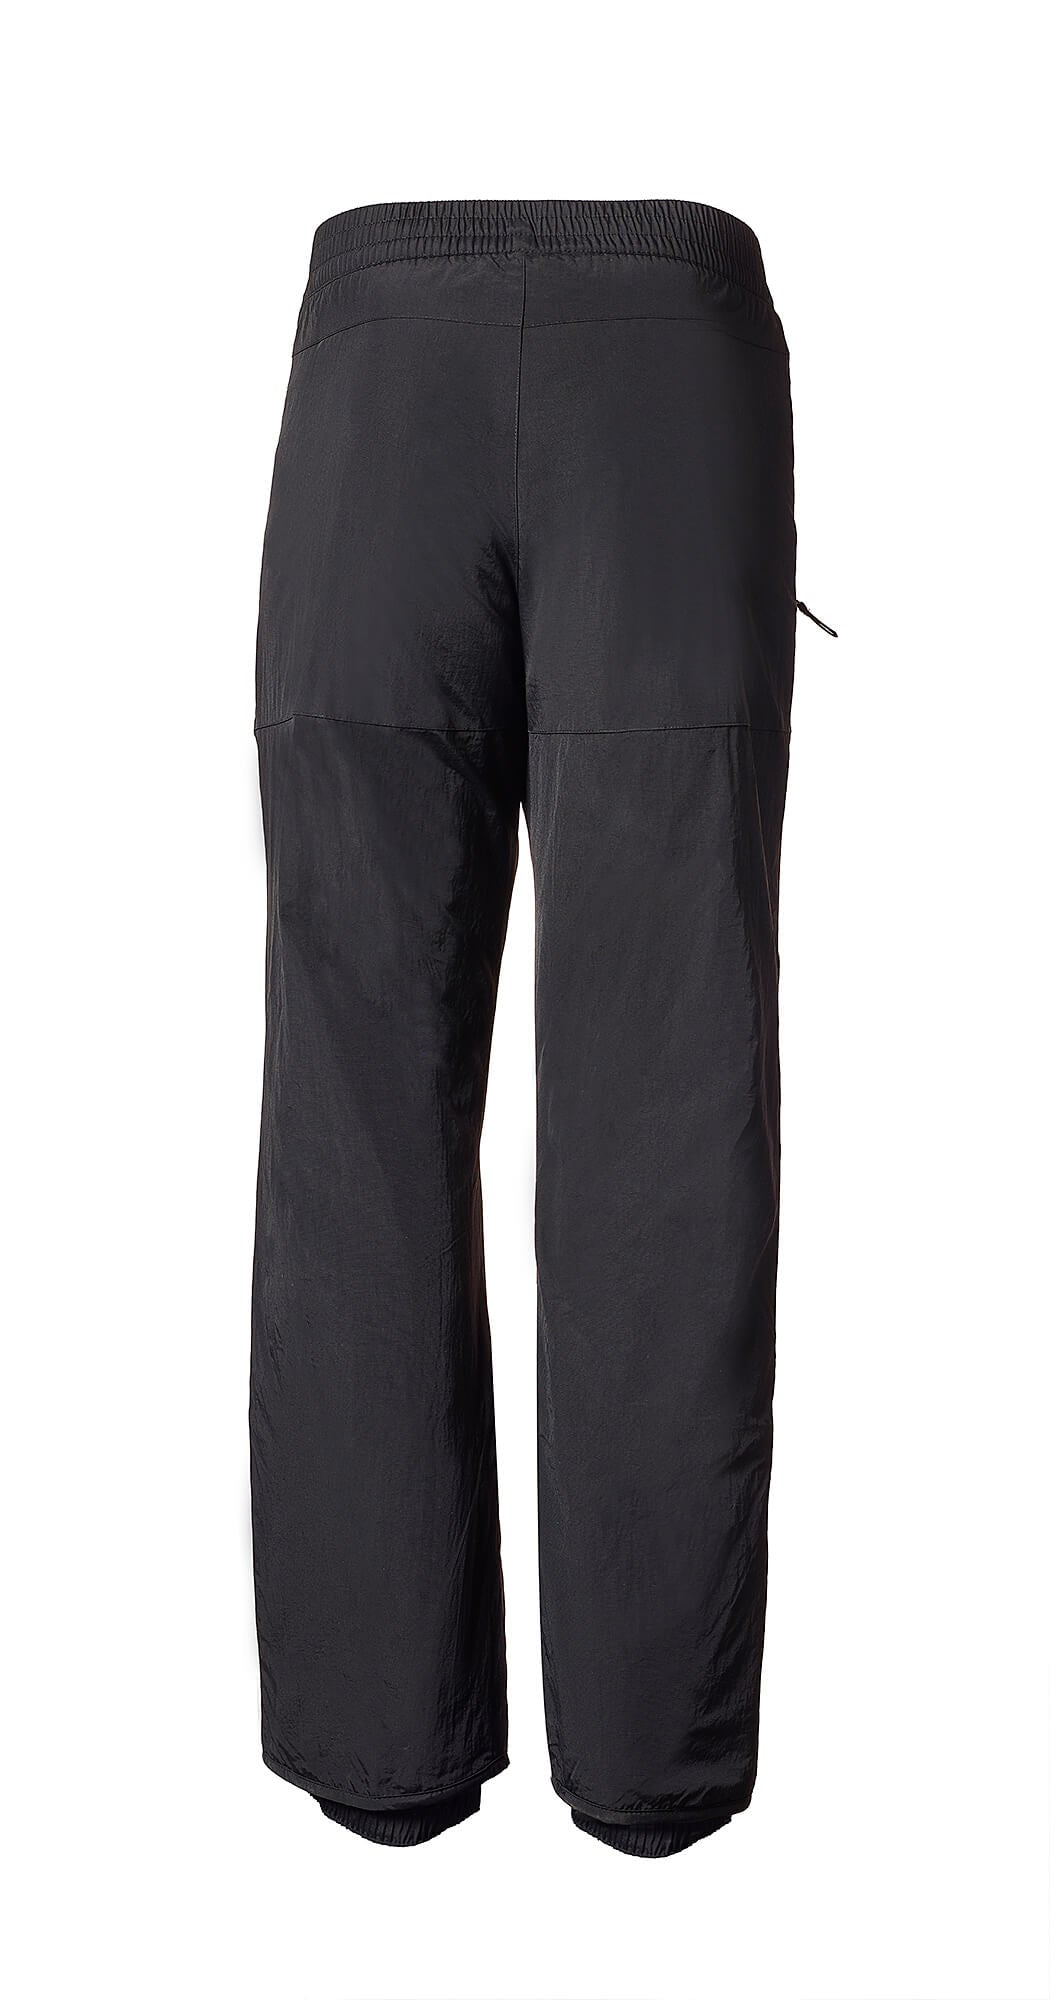 Insulated snow pant Gray rock - Men’s